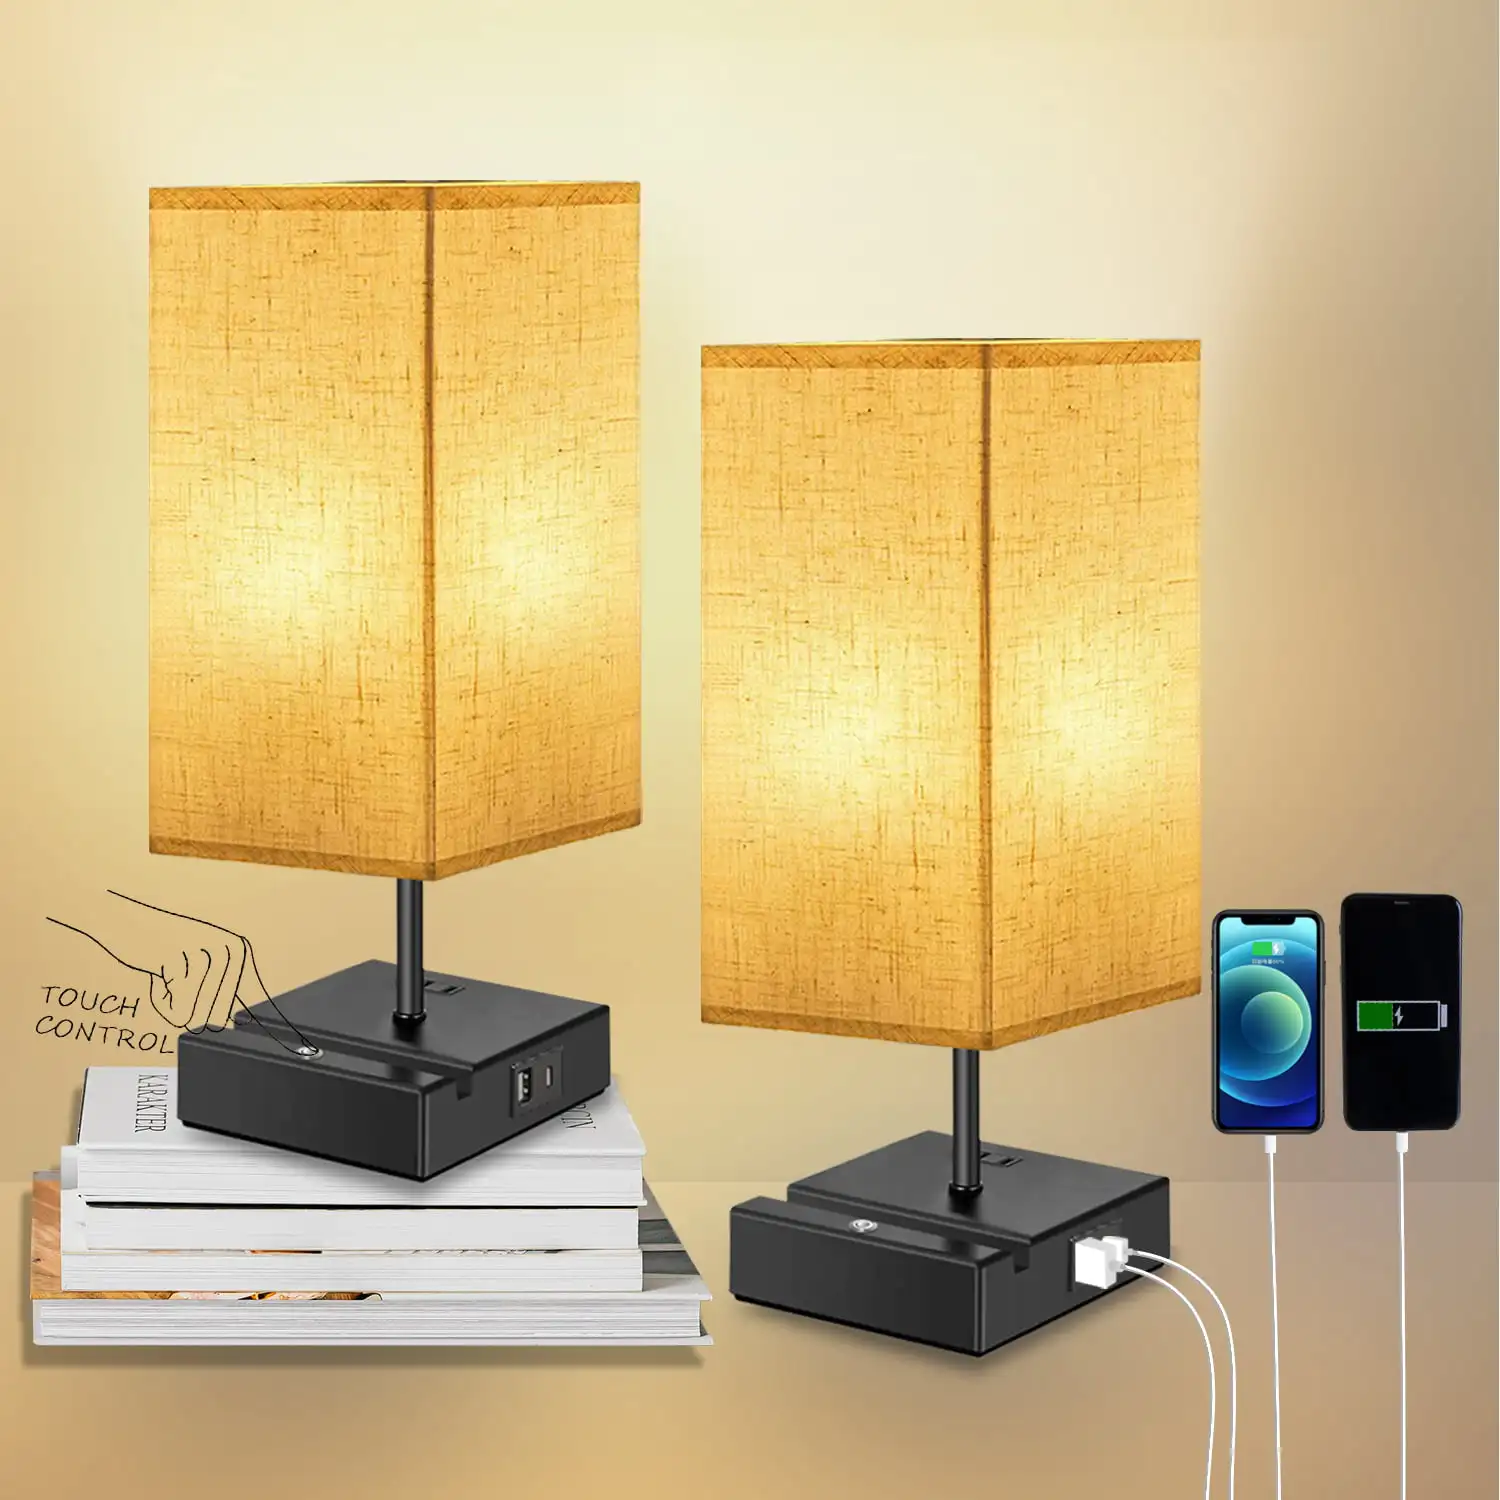 

HMTX Eva's Light Nightstand Lamps set of 2, 3-Way Dimmable Bedside Lamp with USB / Type C Port and Outlet for Bedrooms